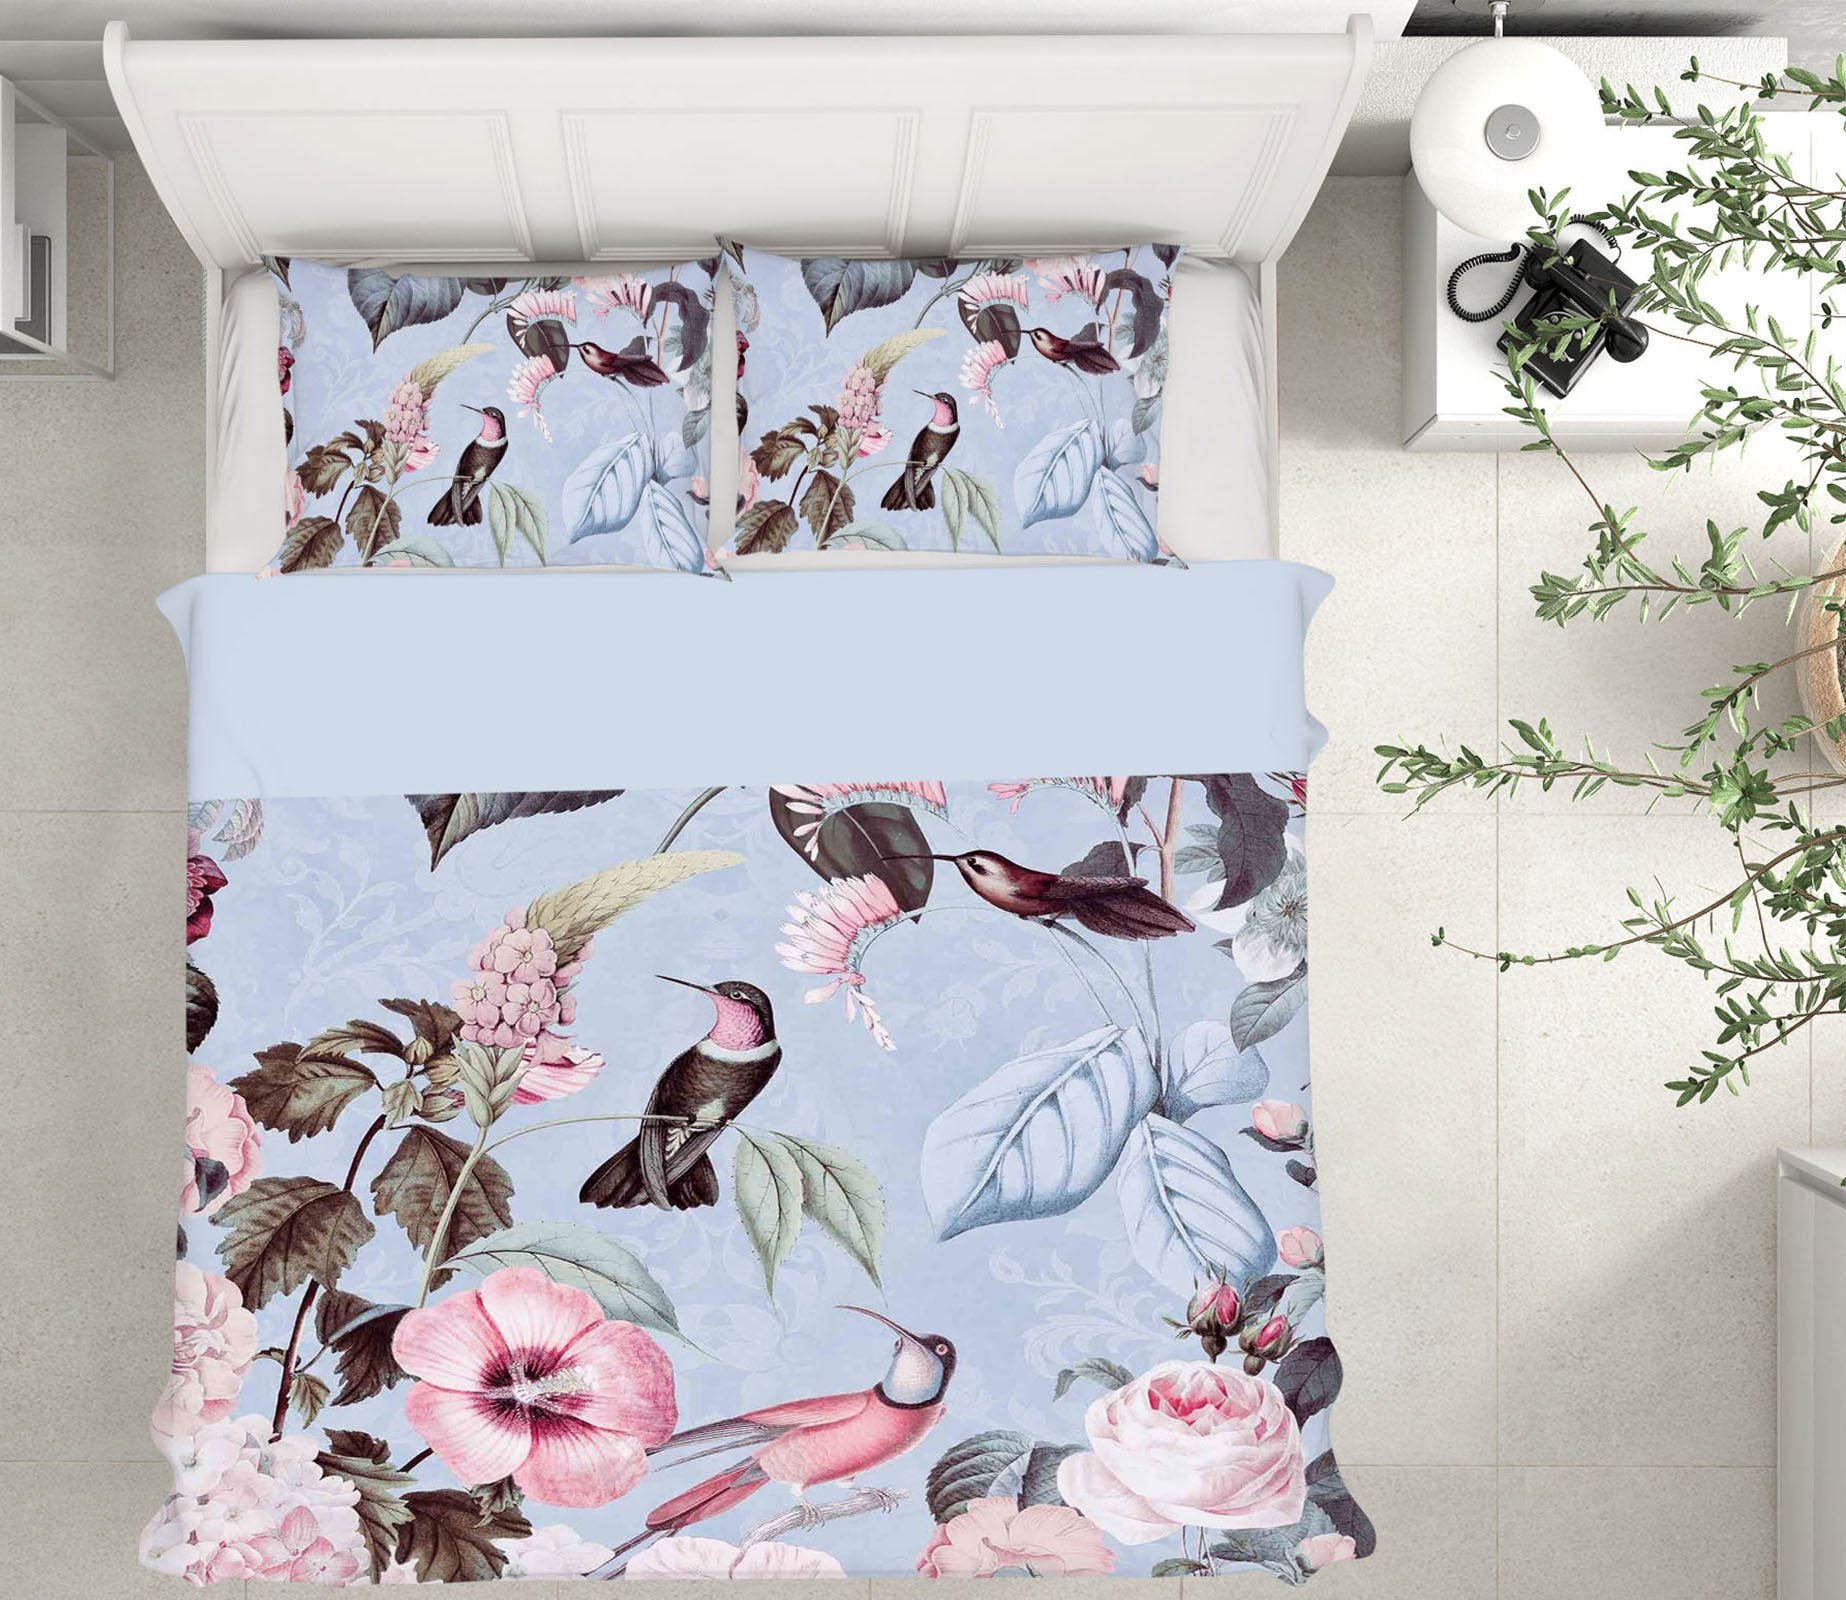 3D Bird Flowers 2121 Andrea haase Bedding Bed Pillowcases Quilt Quiet Covers AJ Creativity Home 